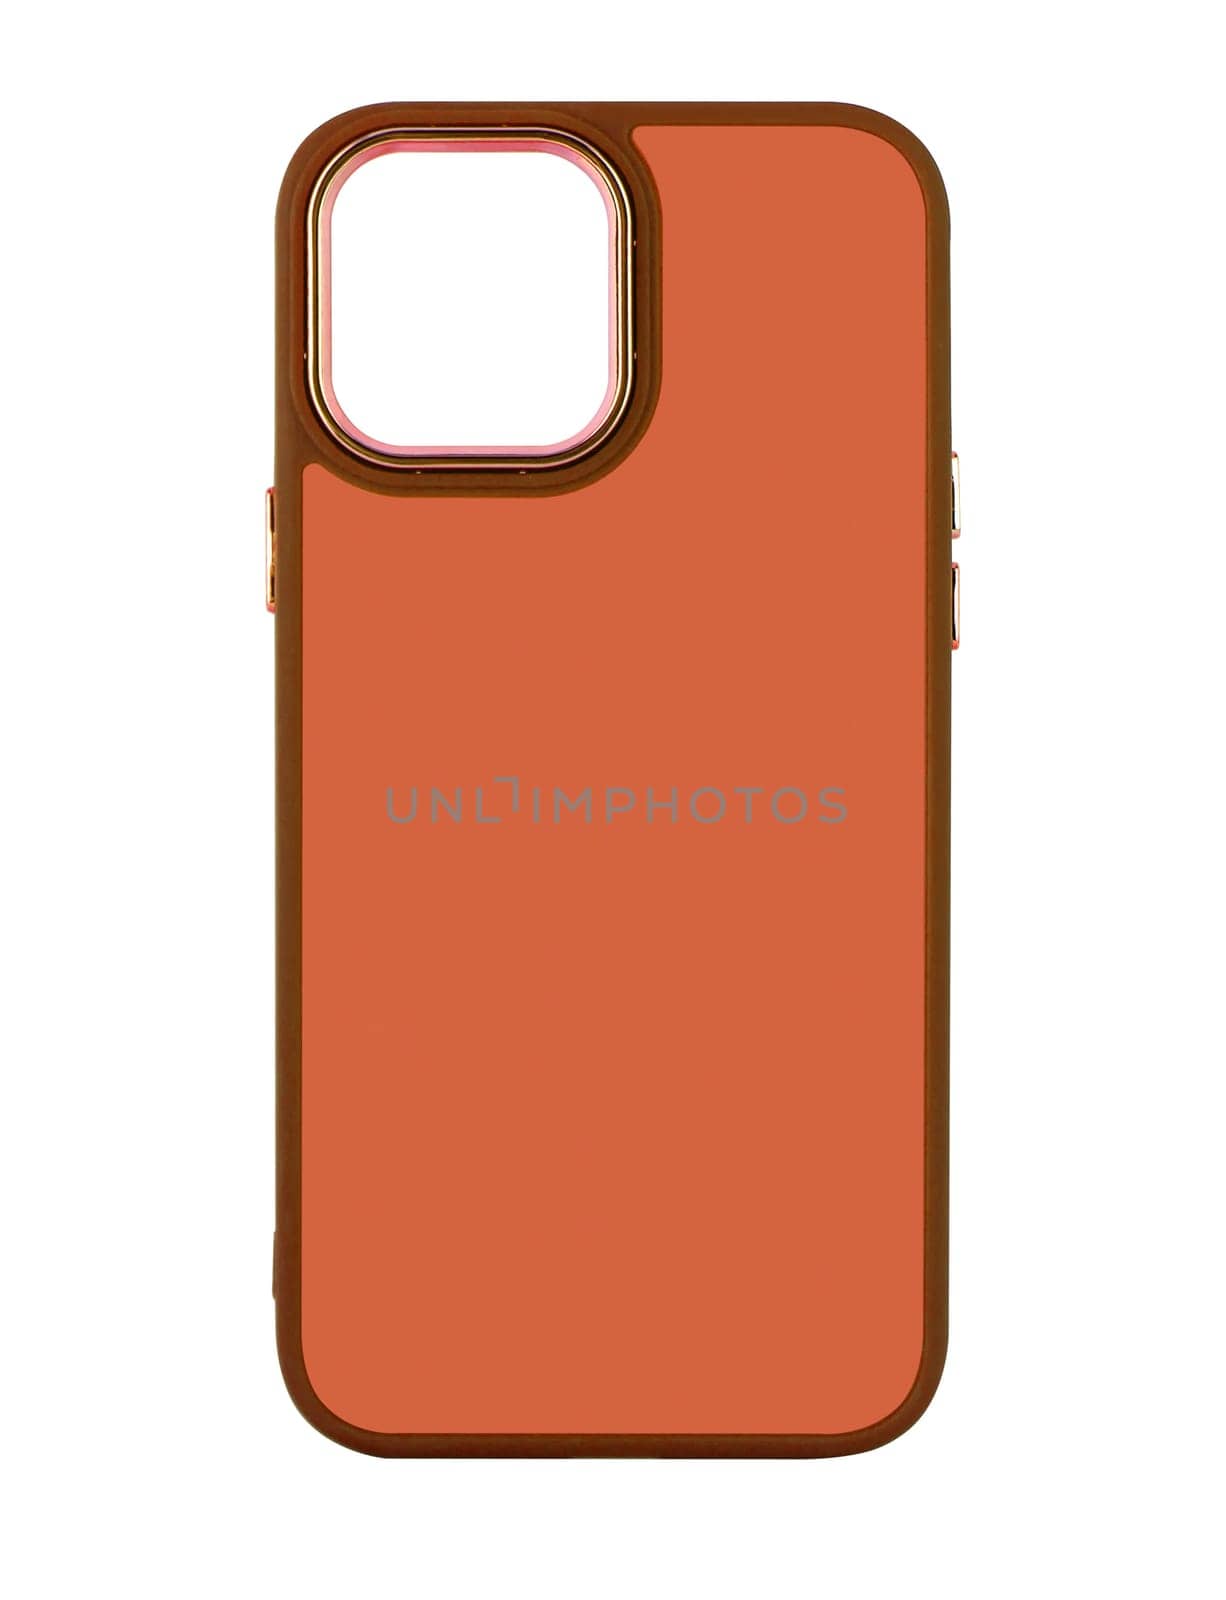 Silicone phone case, on white background in insulation